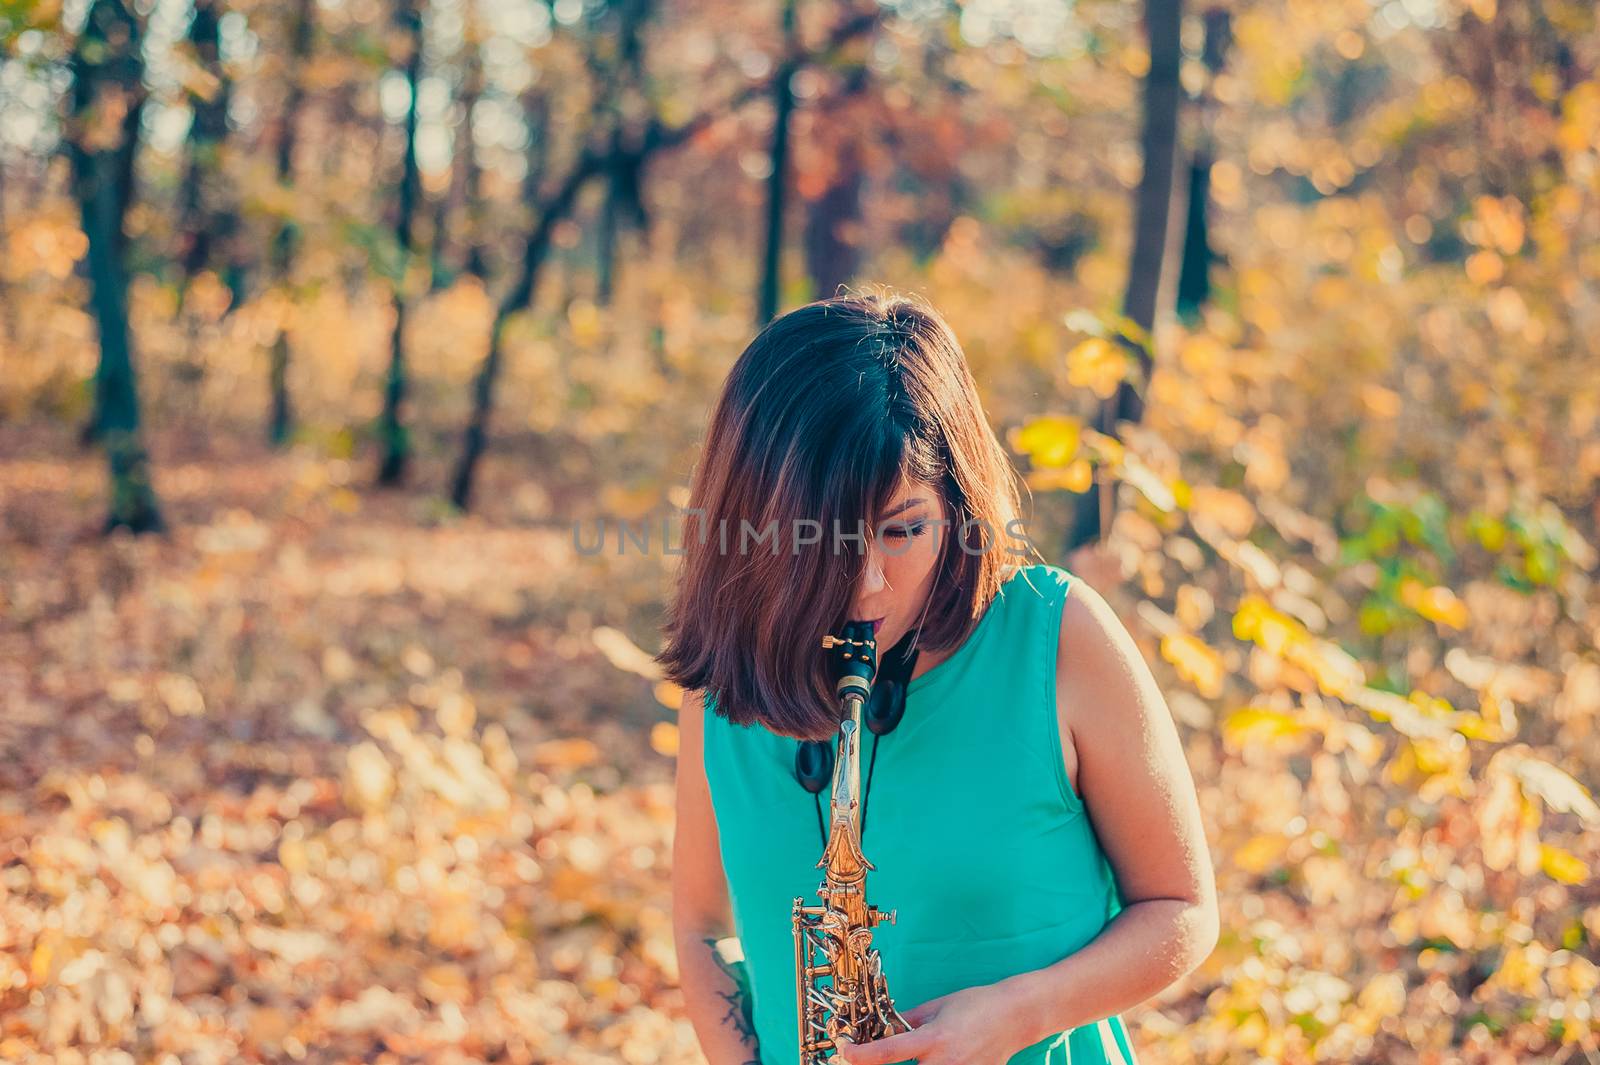 teenager girl with black hair in a blue dress enthusiastically plays the saxophone in the yellow autumn forest by chernobrovin